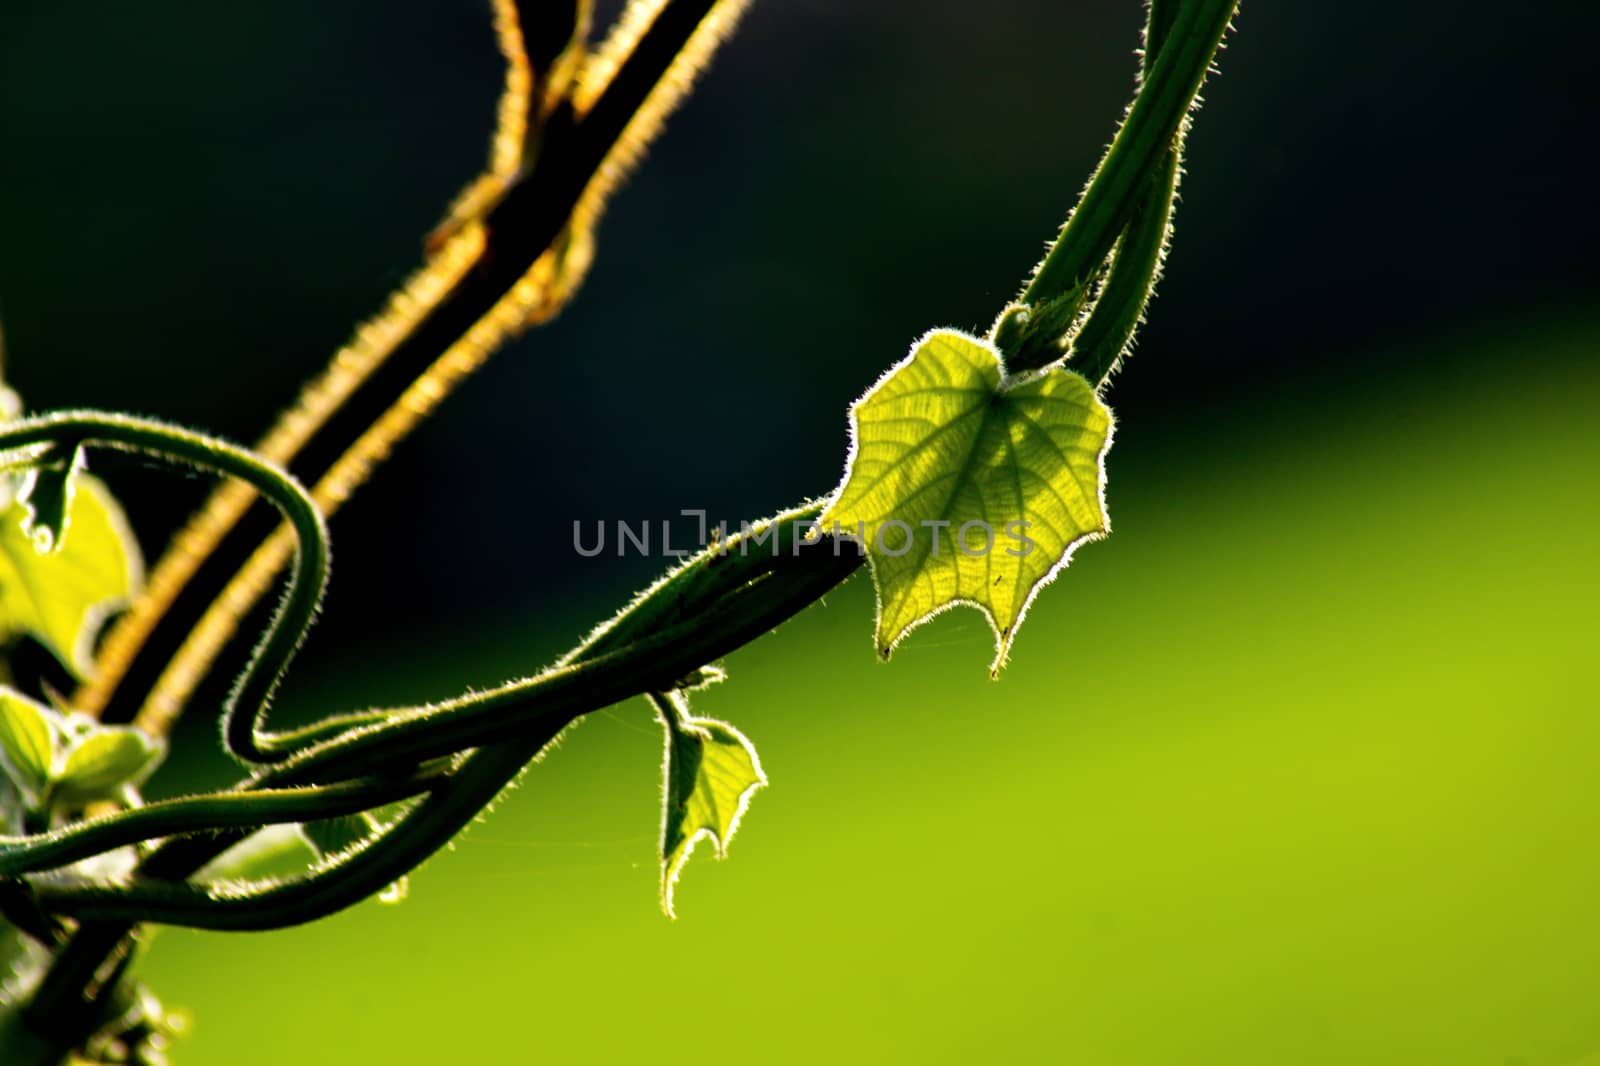 Fresh green leaf and vine on blur background, with rimlight in photo.